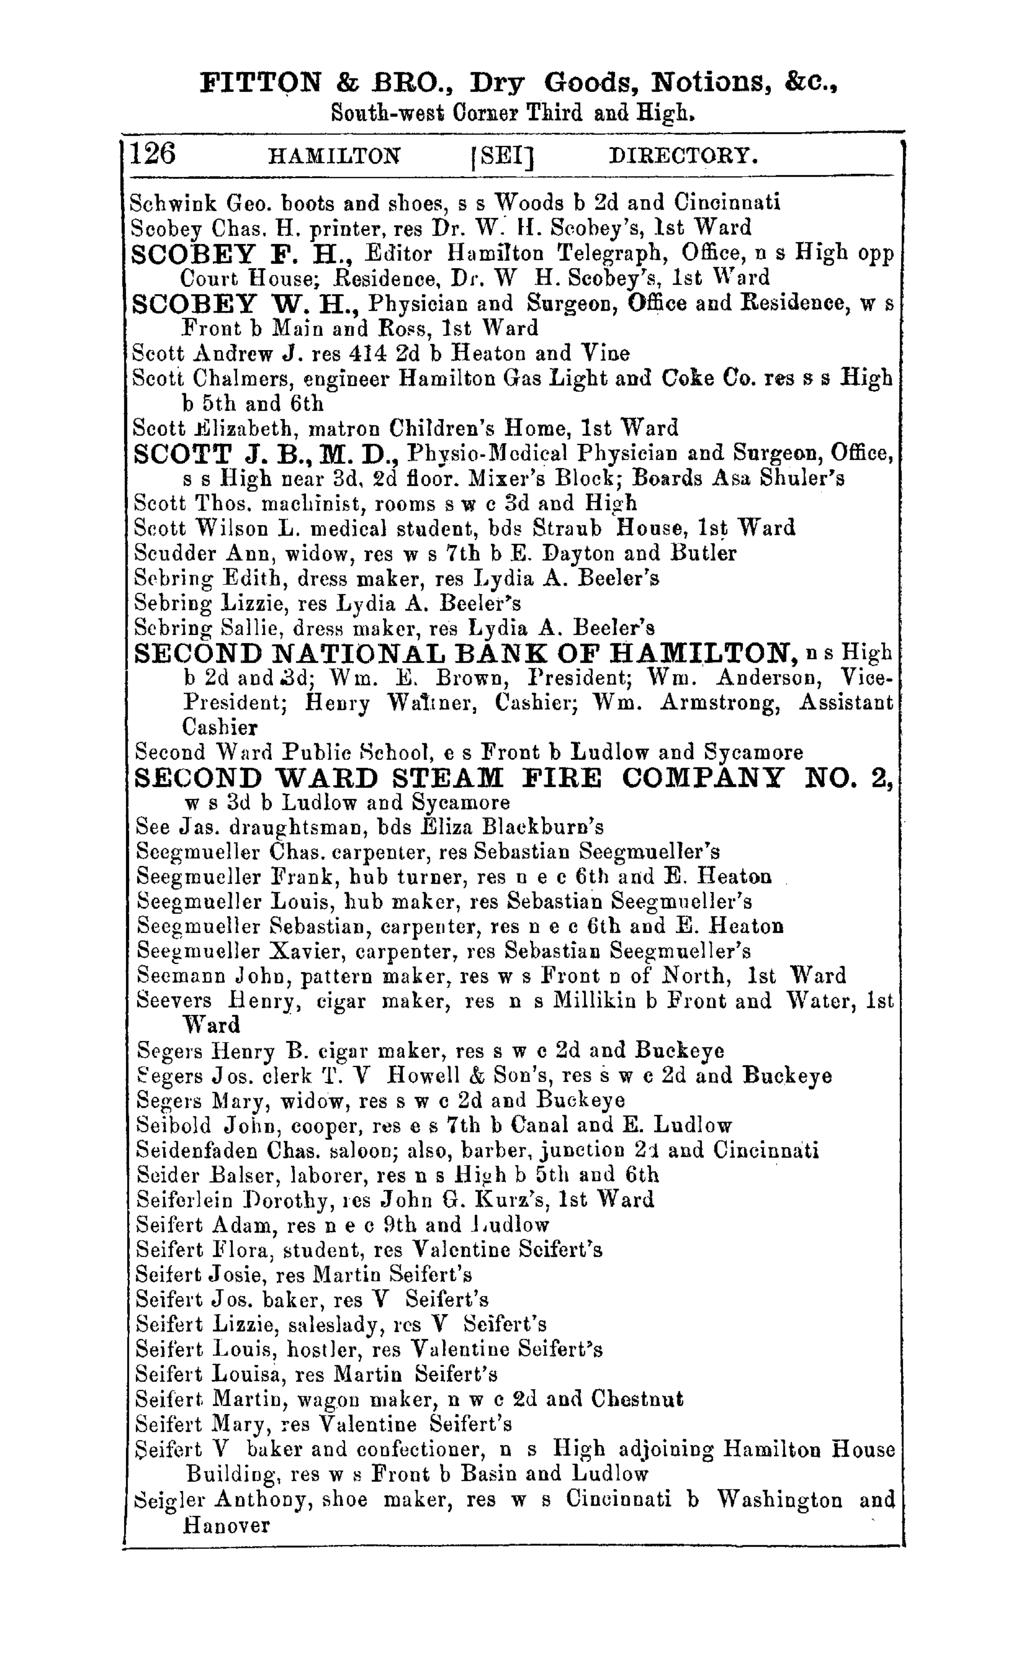 FITTON &.BRO., Dry Goods, Notions, &0., South-west Corner Third and High. 126 HAMILTON rsel] DIRECTORY. Schwink Geo. boots and shoes, s s Woods b 2d and Cincinnati Scobey Chas. H. printer, res Dr.